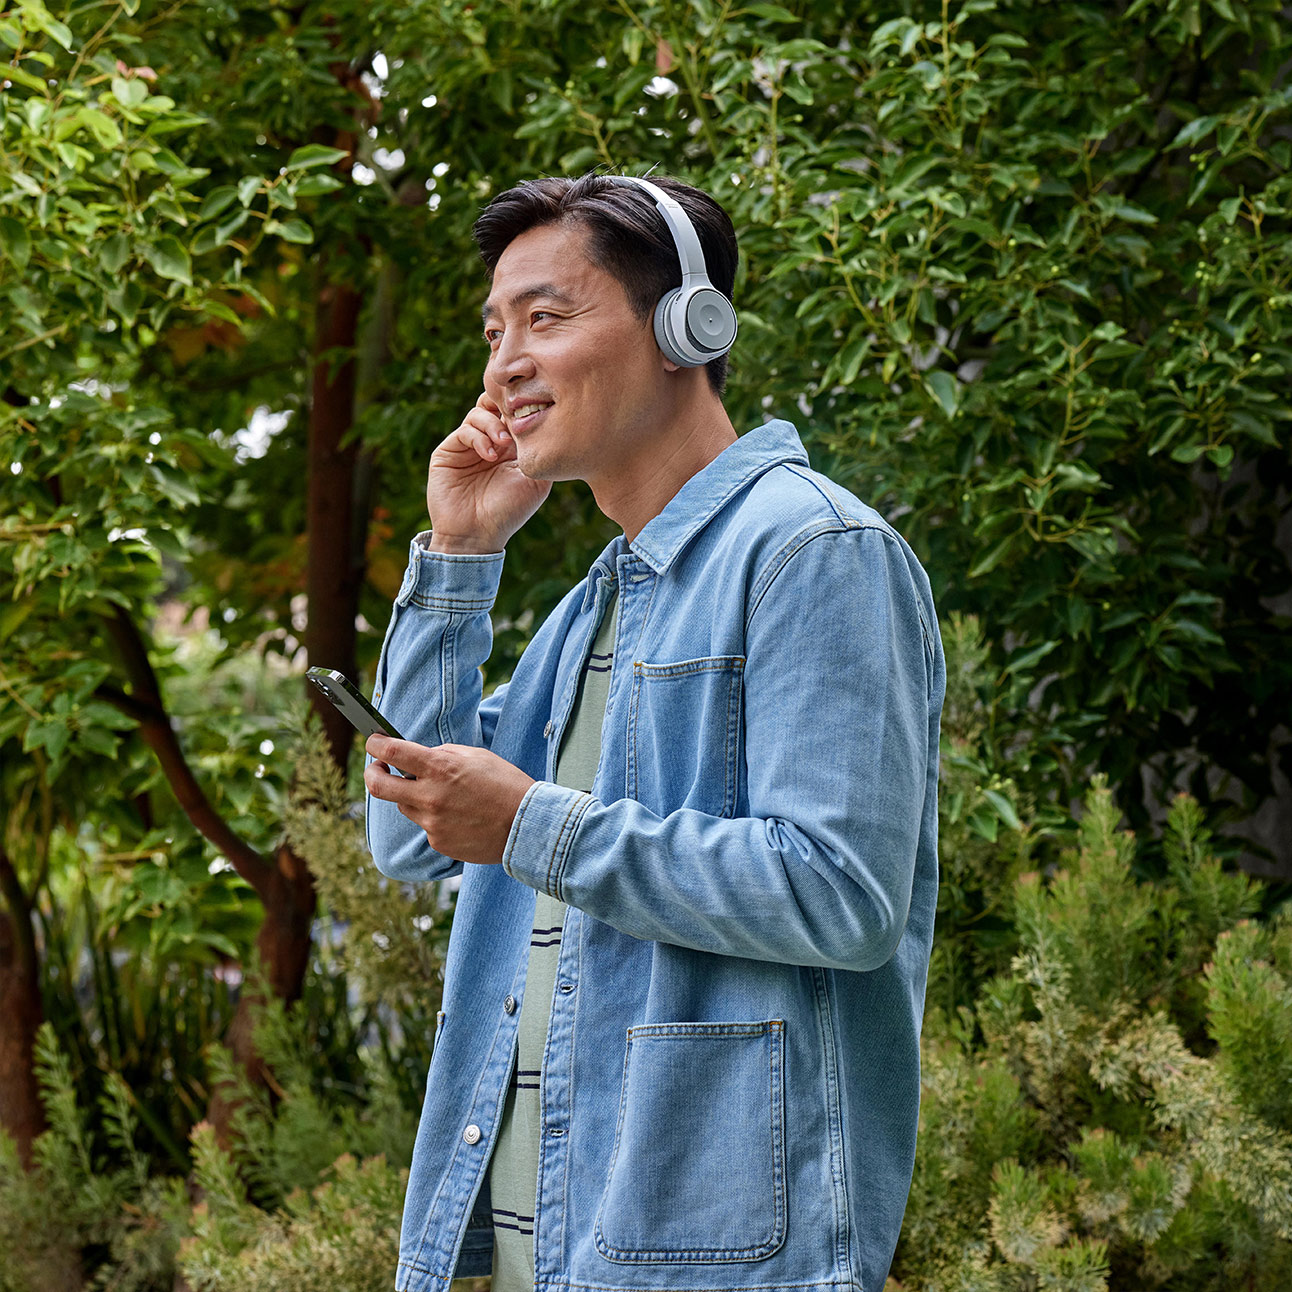 Person walking outdoors interacts with a headset while on a mobile call.